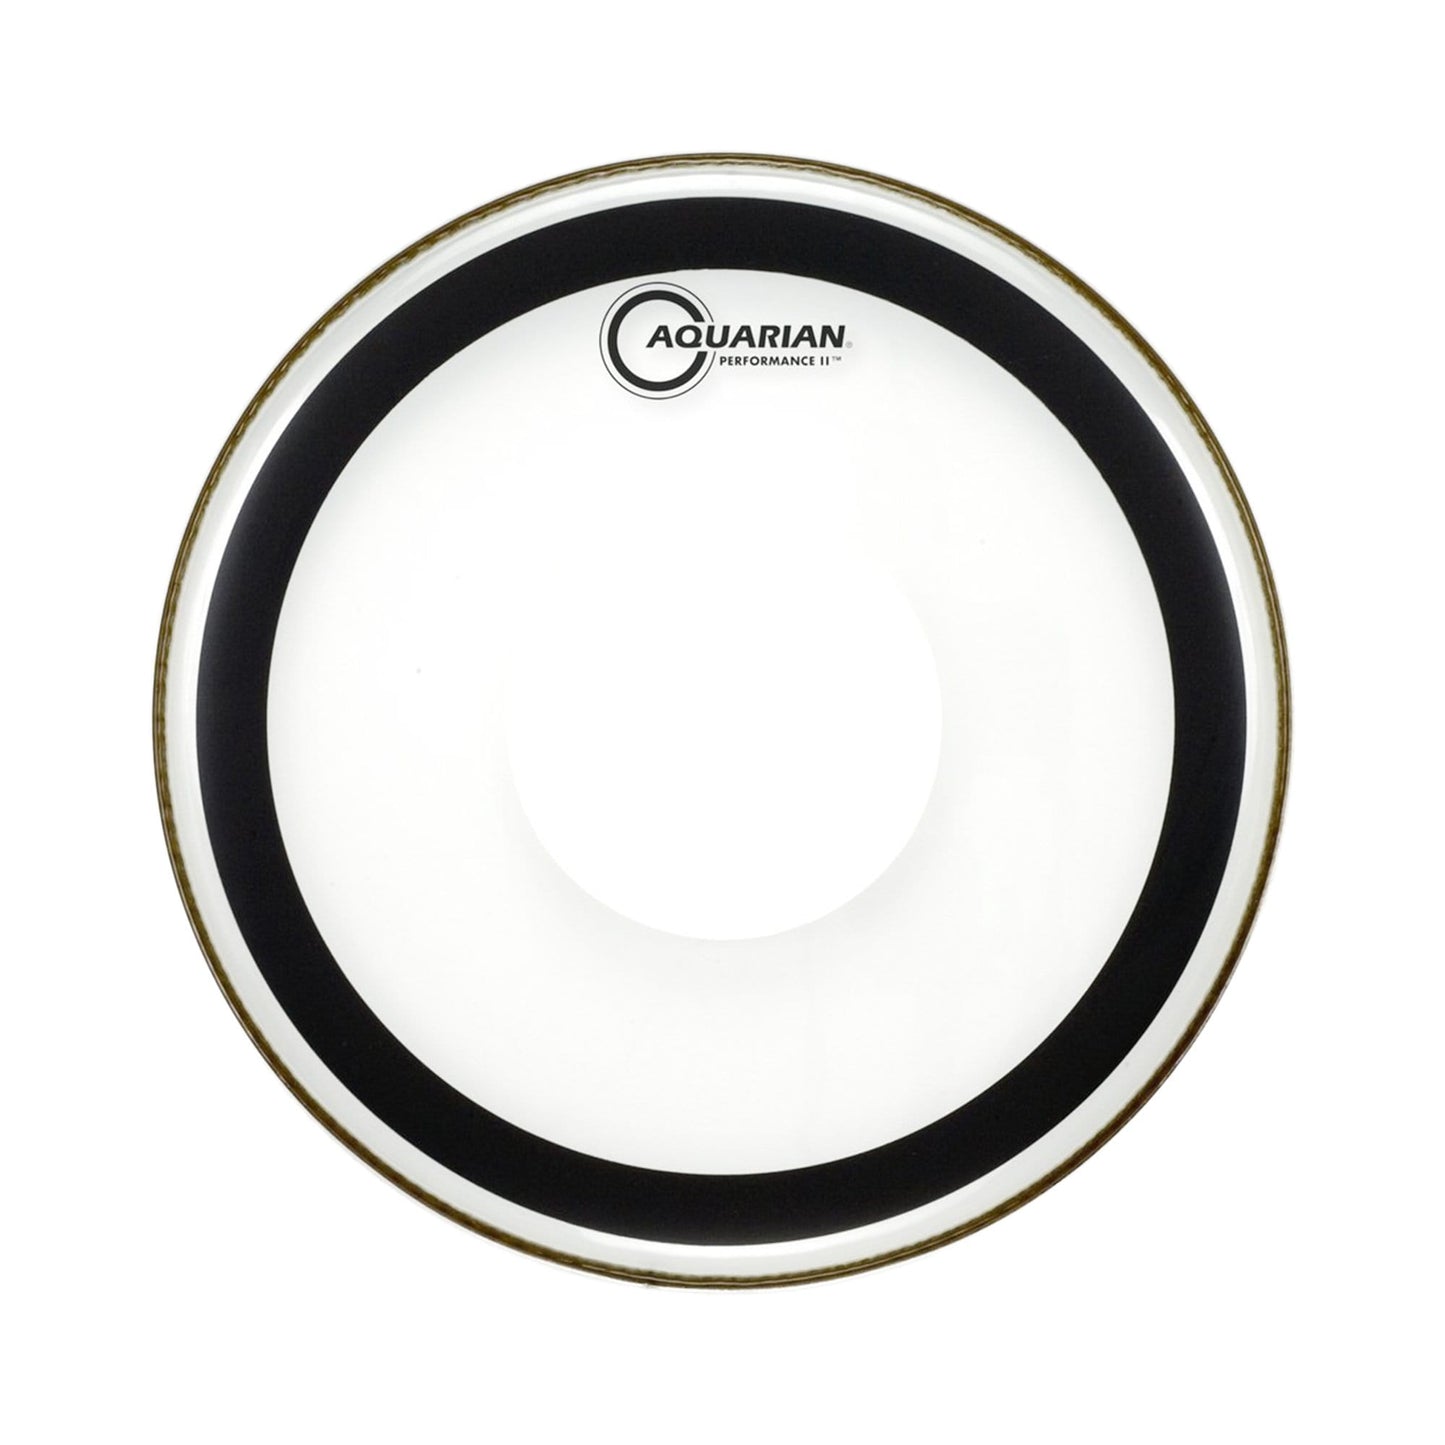 Aquarian 15" Performance II Clear w/Dot Drums and Percussion / Parts and Accessories / Heads